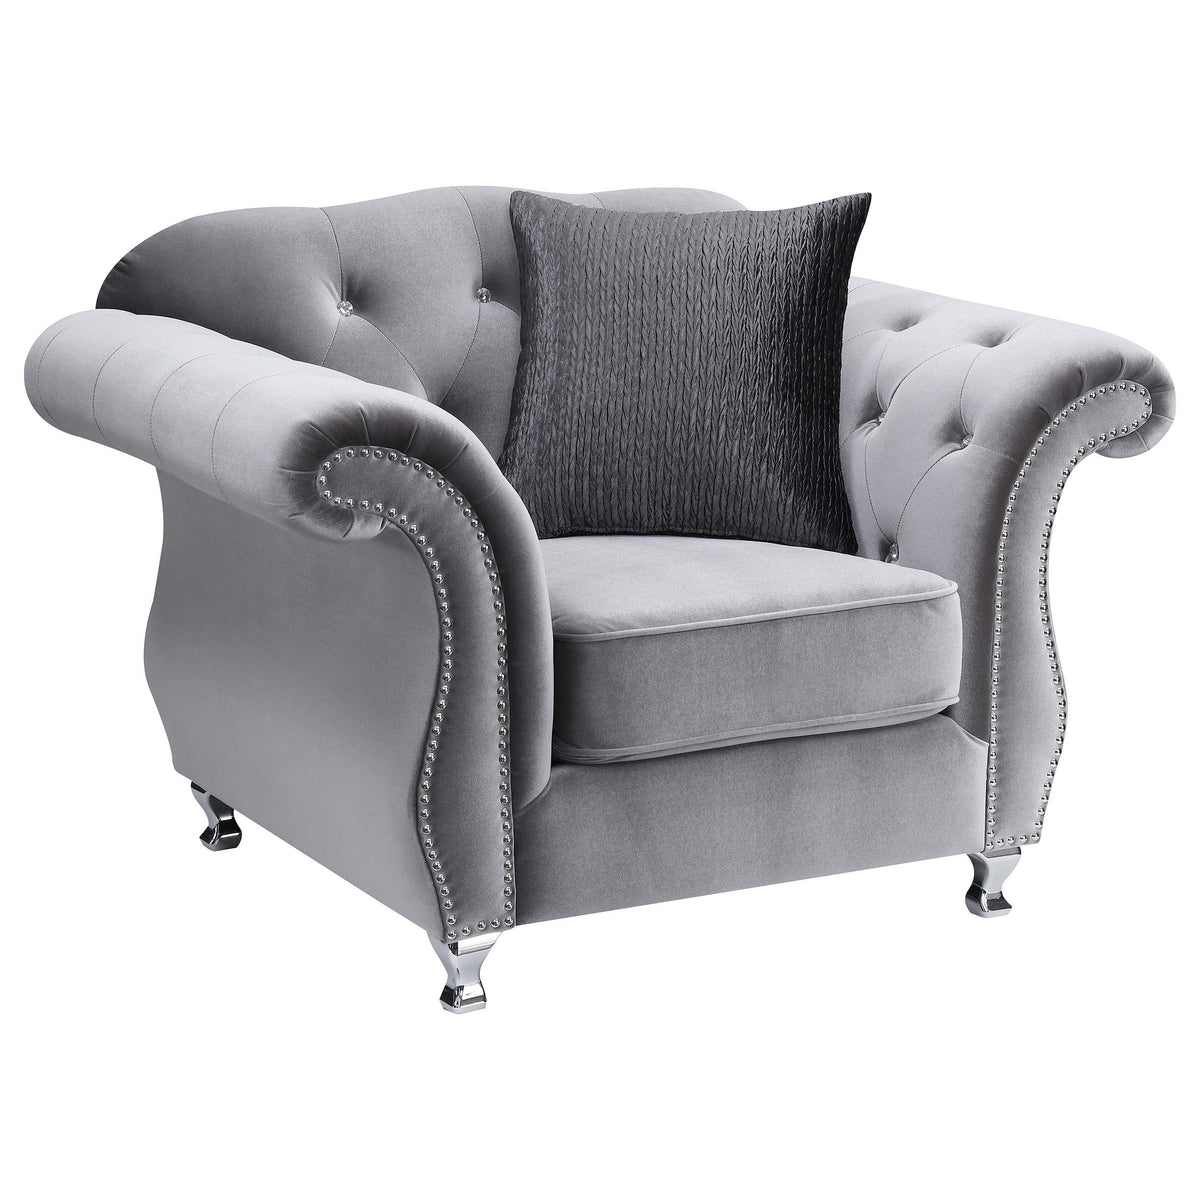 Frostine Button Tufted Chair Silver Frostine Button Tufted Chair Silver Half Price Furniture